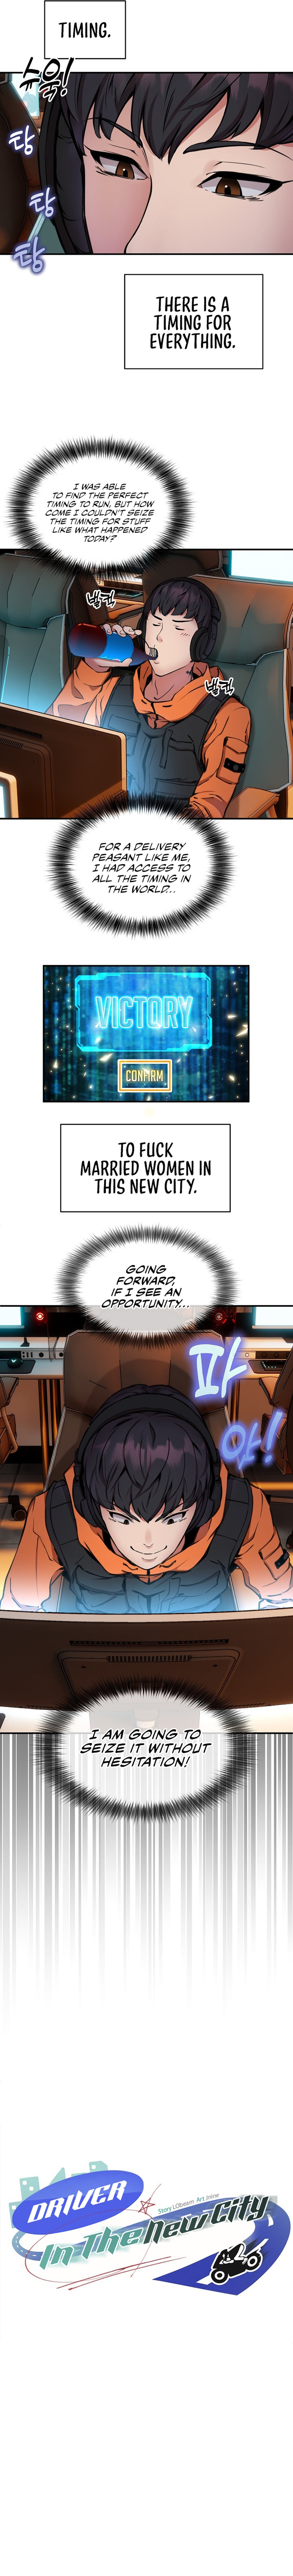 Driver in the New City - Chapter 7 Page 5